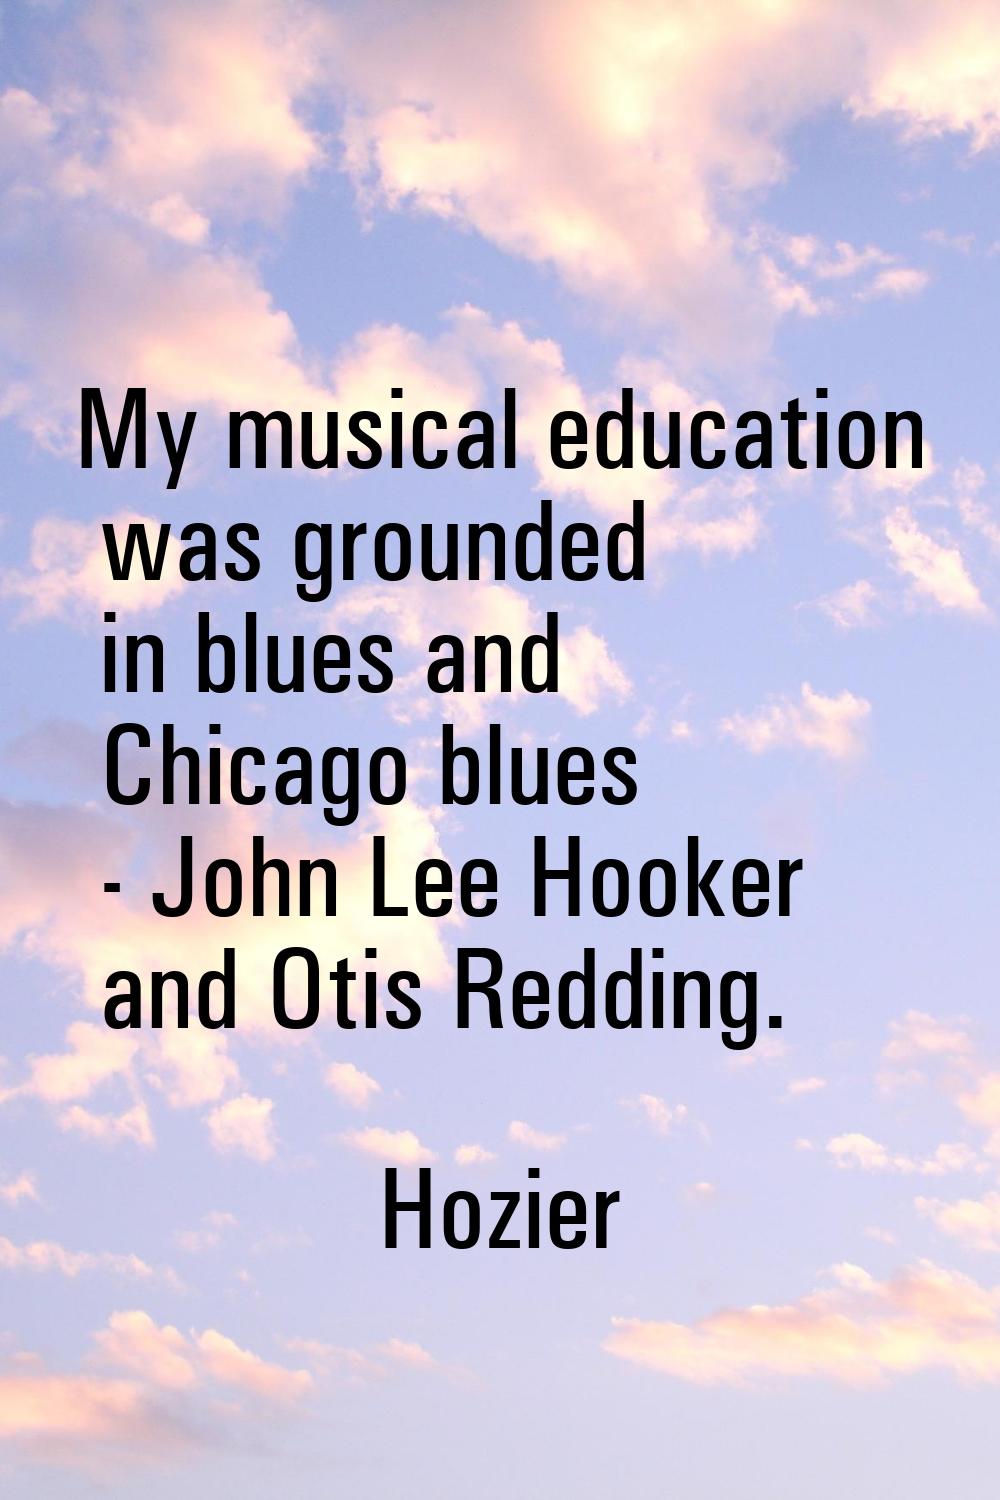 My musical education was grounded in blues and Chicago blues - John Lee Hooker and Otis Redding.